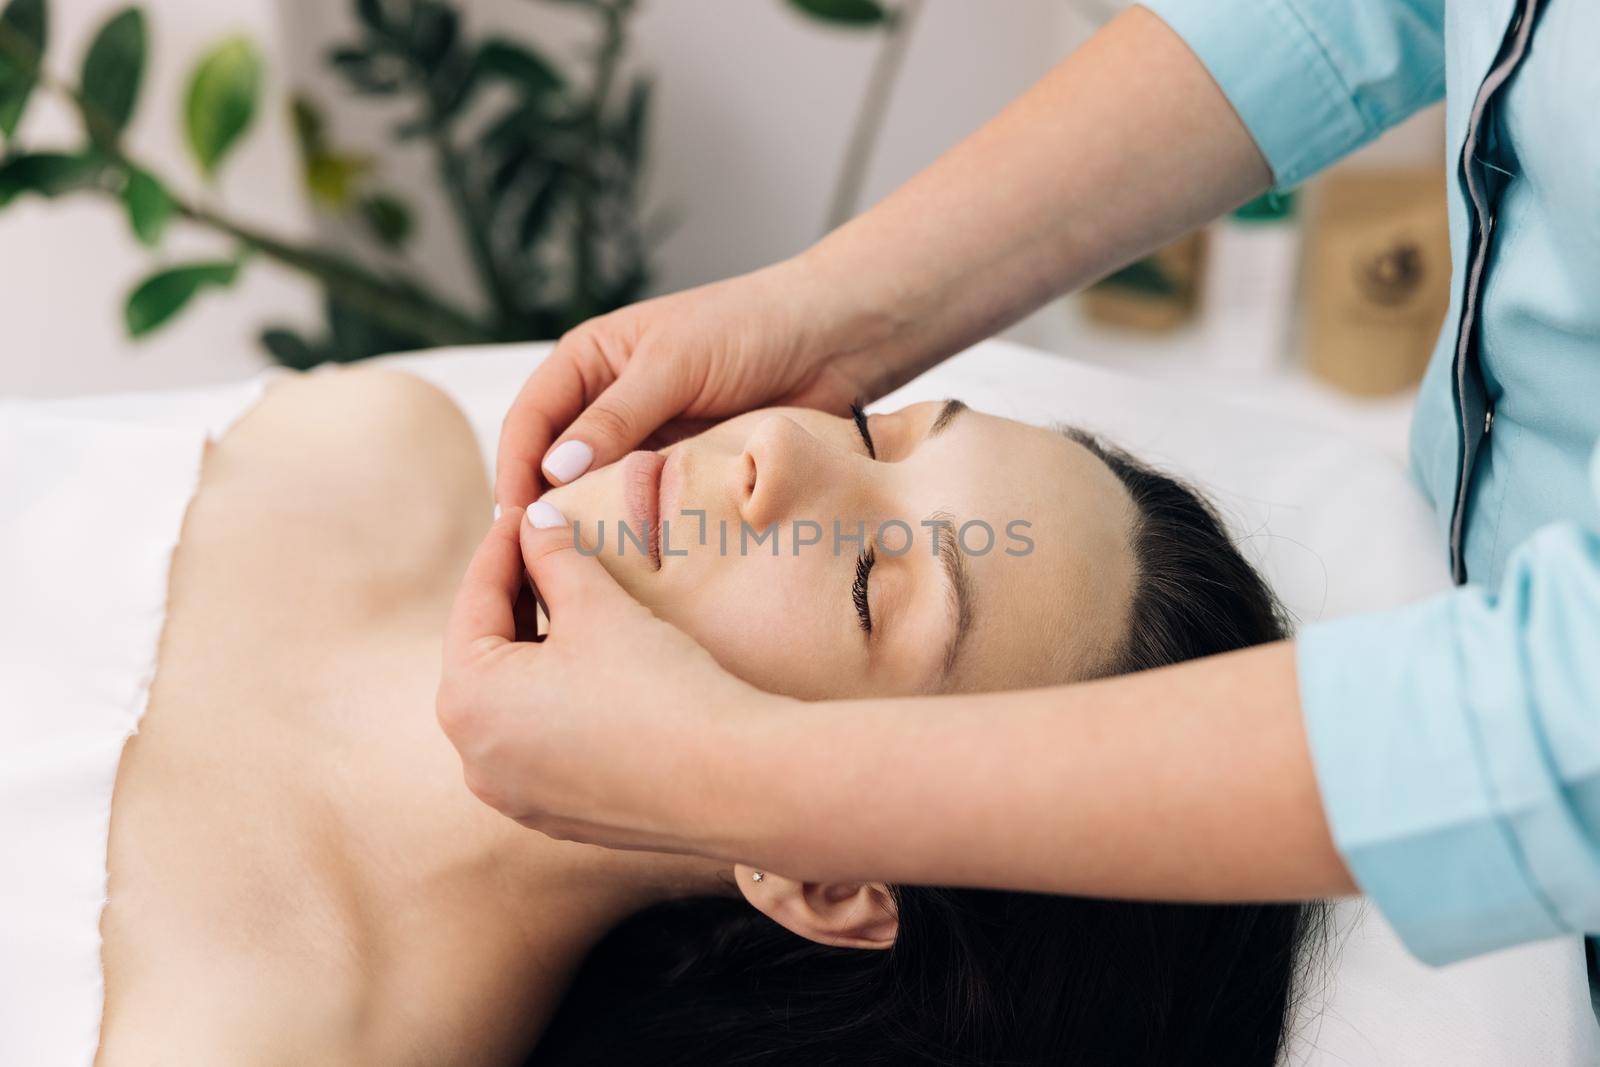 Female enjoying relaxing face massage in cosmetology spa centre. Body care, skin care, beauty treatment. Wellness and beauty salon. Relaxing and health. Spa woman facial massage.